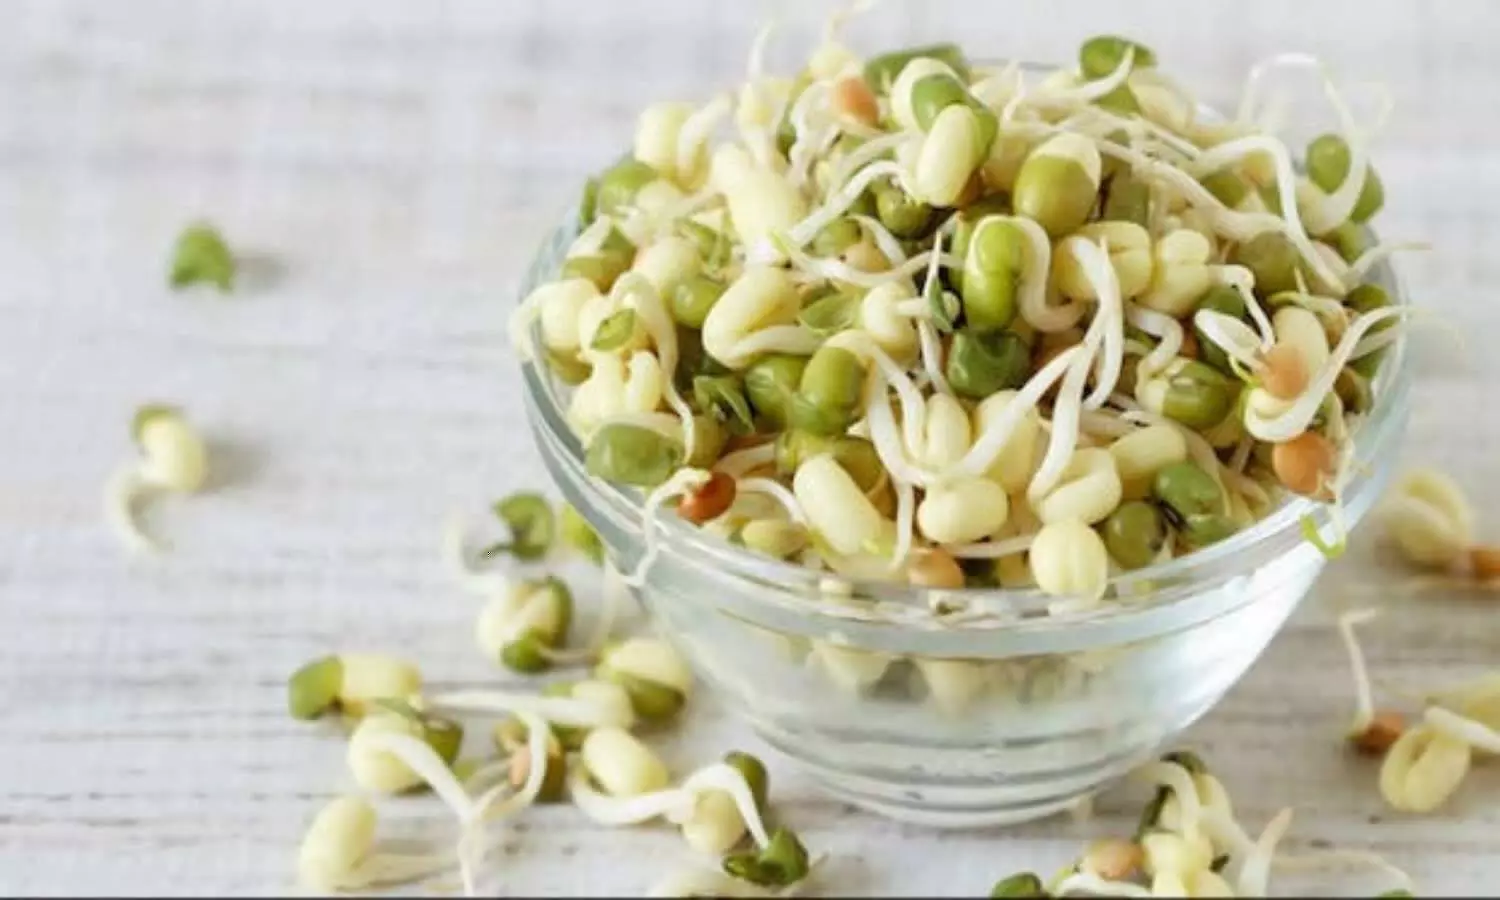 5 Amazing Moong Sprouts Benefits